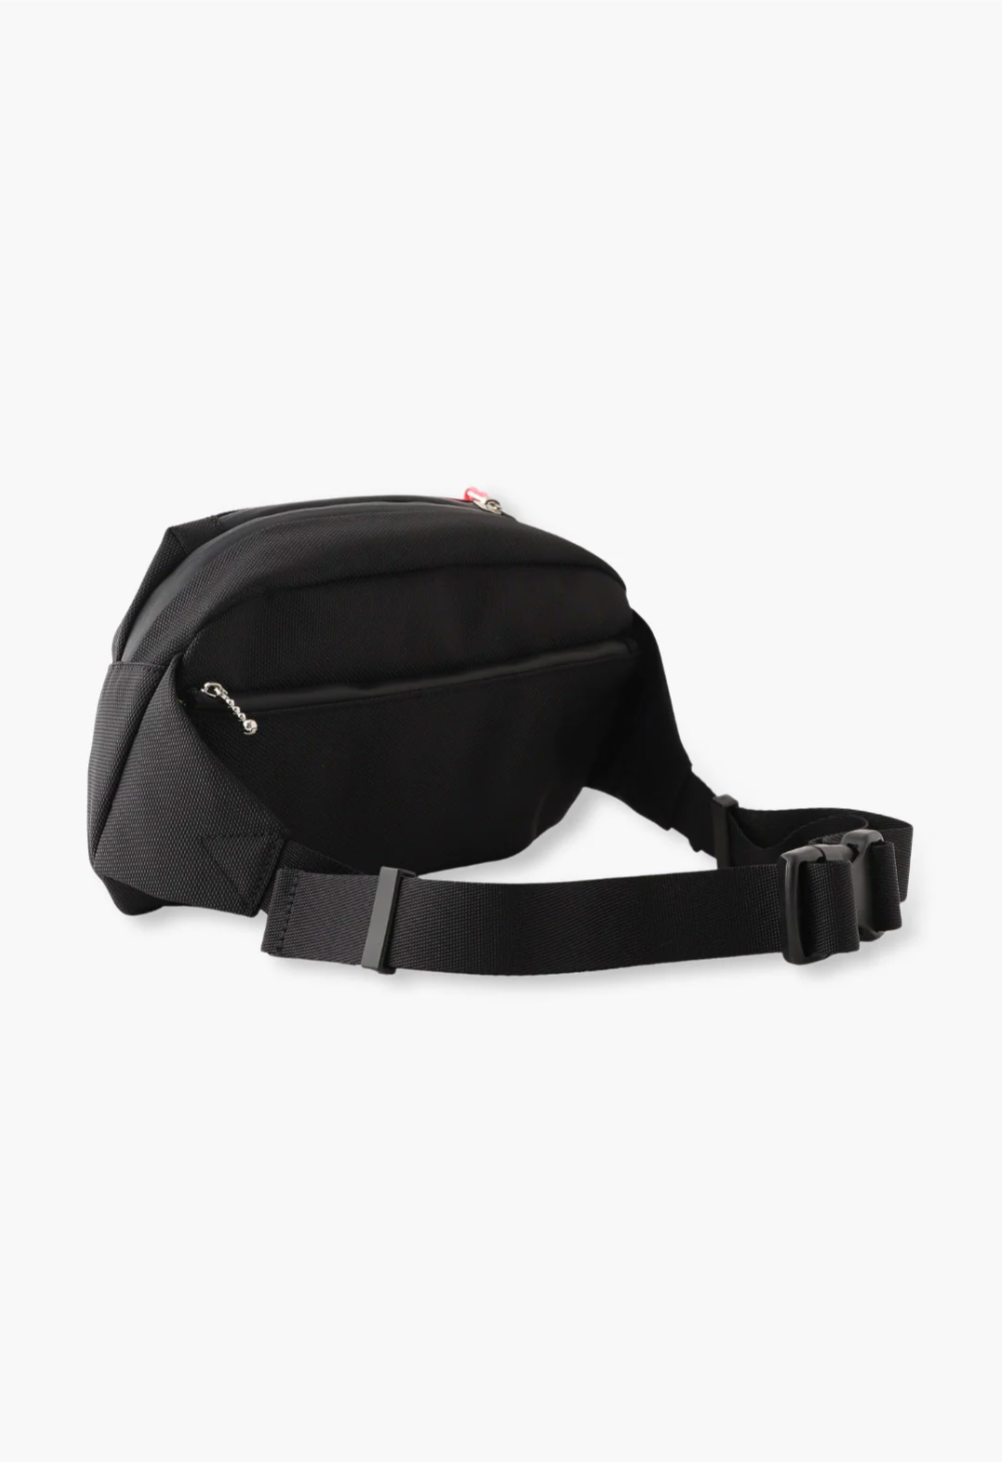 The Anyone Fanny Pack Classic silhouette with buckle waist closure, and zipper pocket on the back